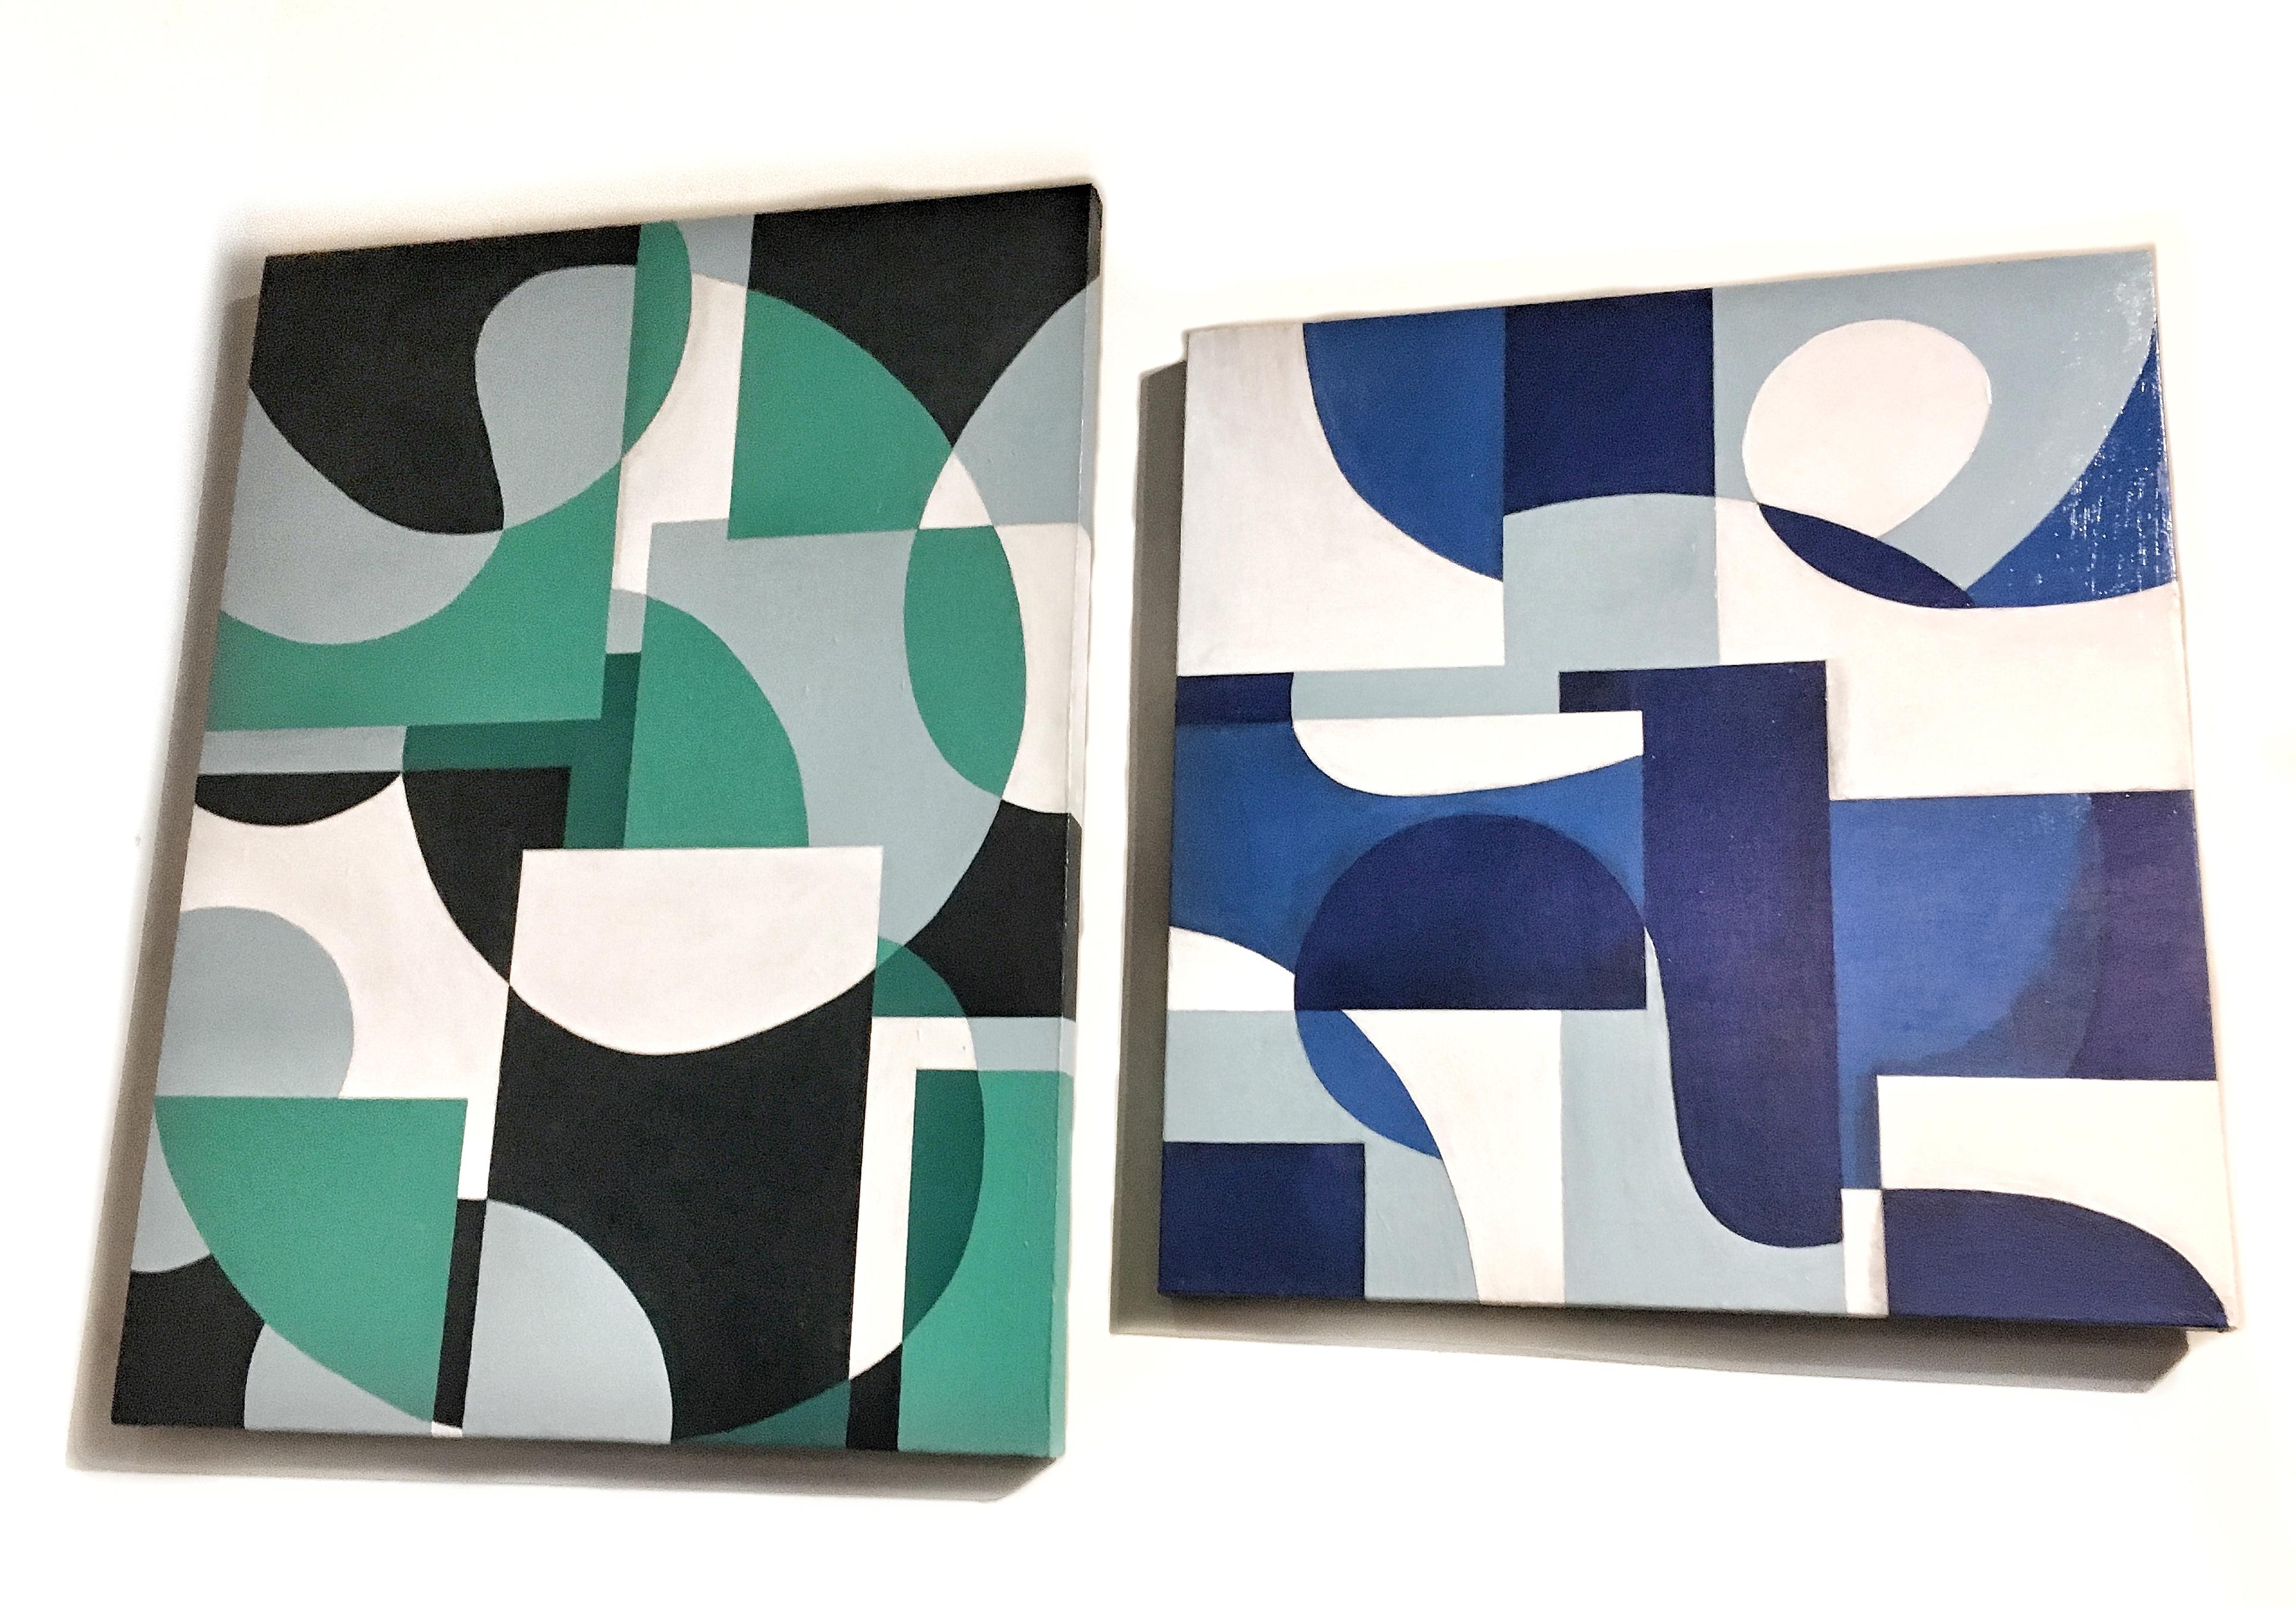 GA2002 - Abstract Geometric Interior Painting with Green and White Shapes - Blue Abstract Painting by Zach Touchon